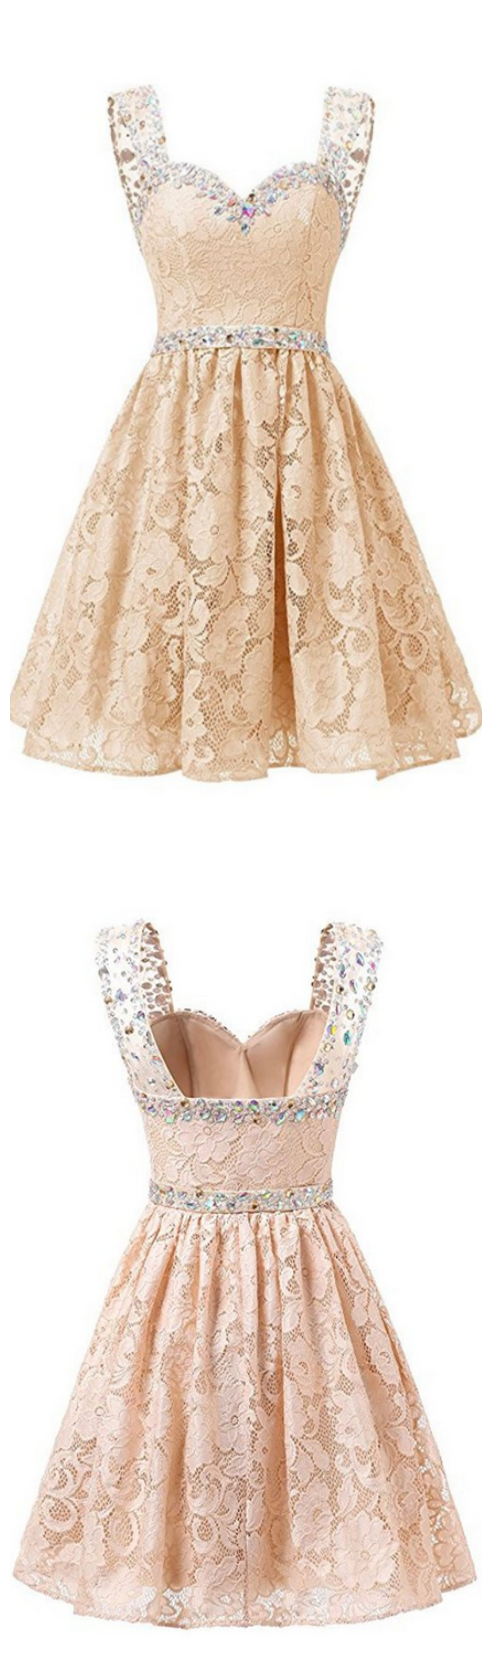 Champagne Sweetheart Lace Beading Homecoming Dress,straps A Line Homecoming Dresses,short Prom Dress